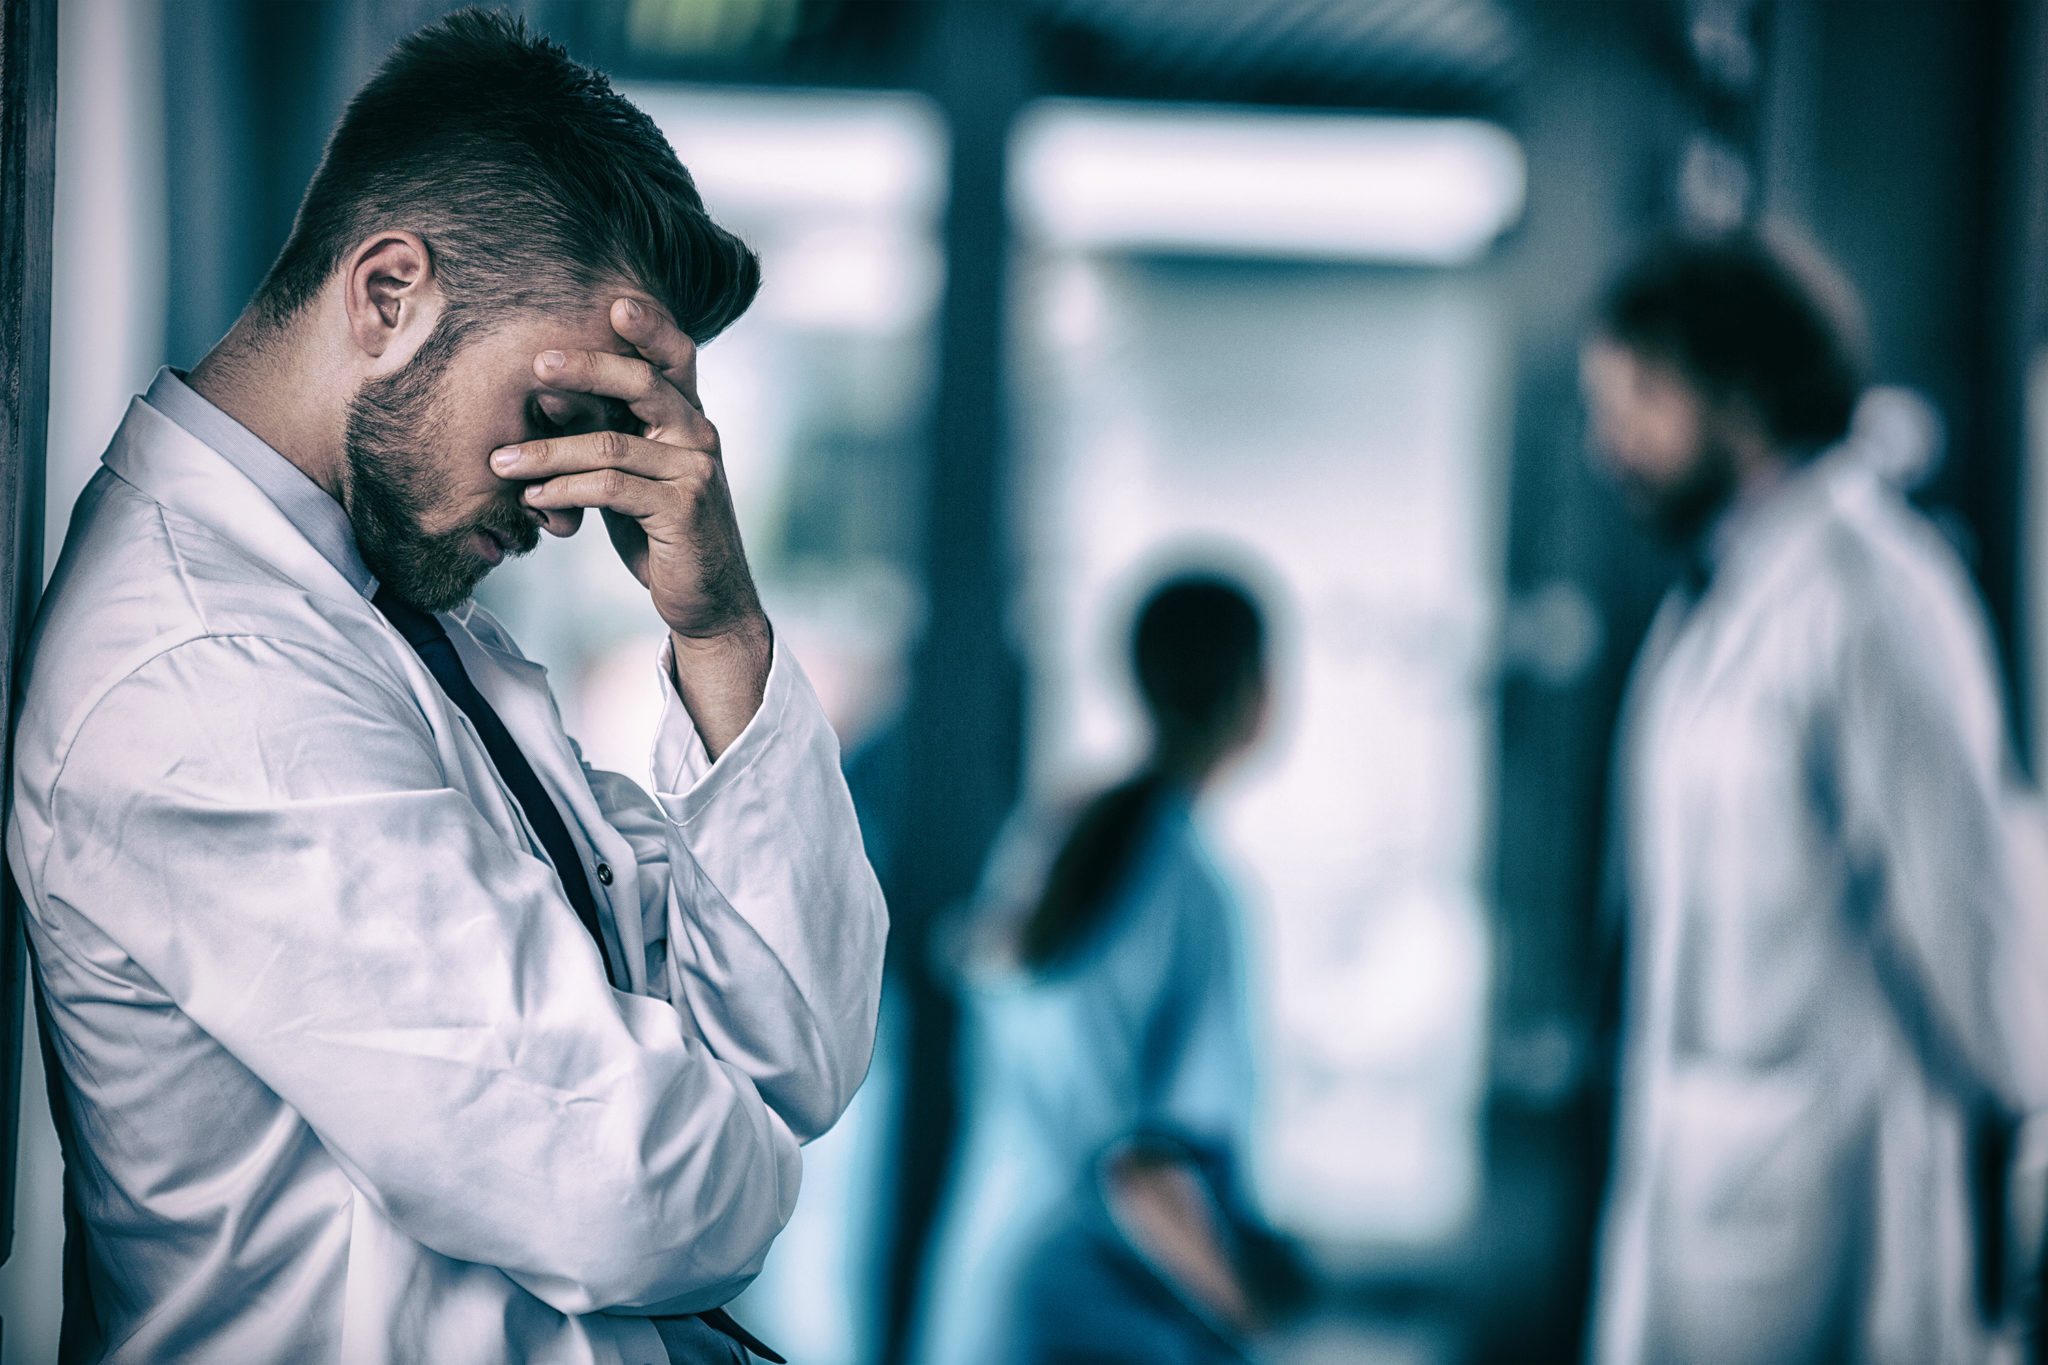 Mitigating Physician Burnout: Developing a Proactive Organizational Approach